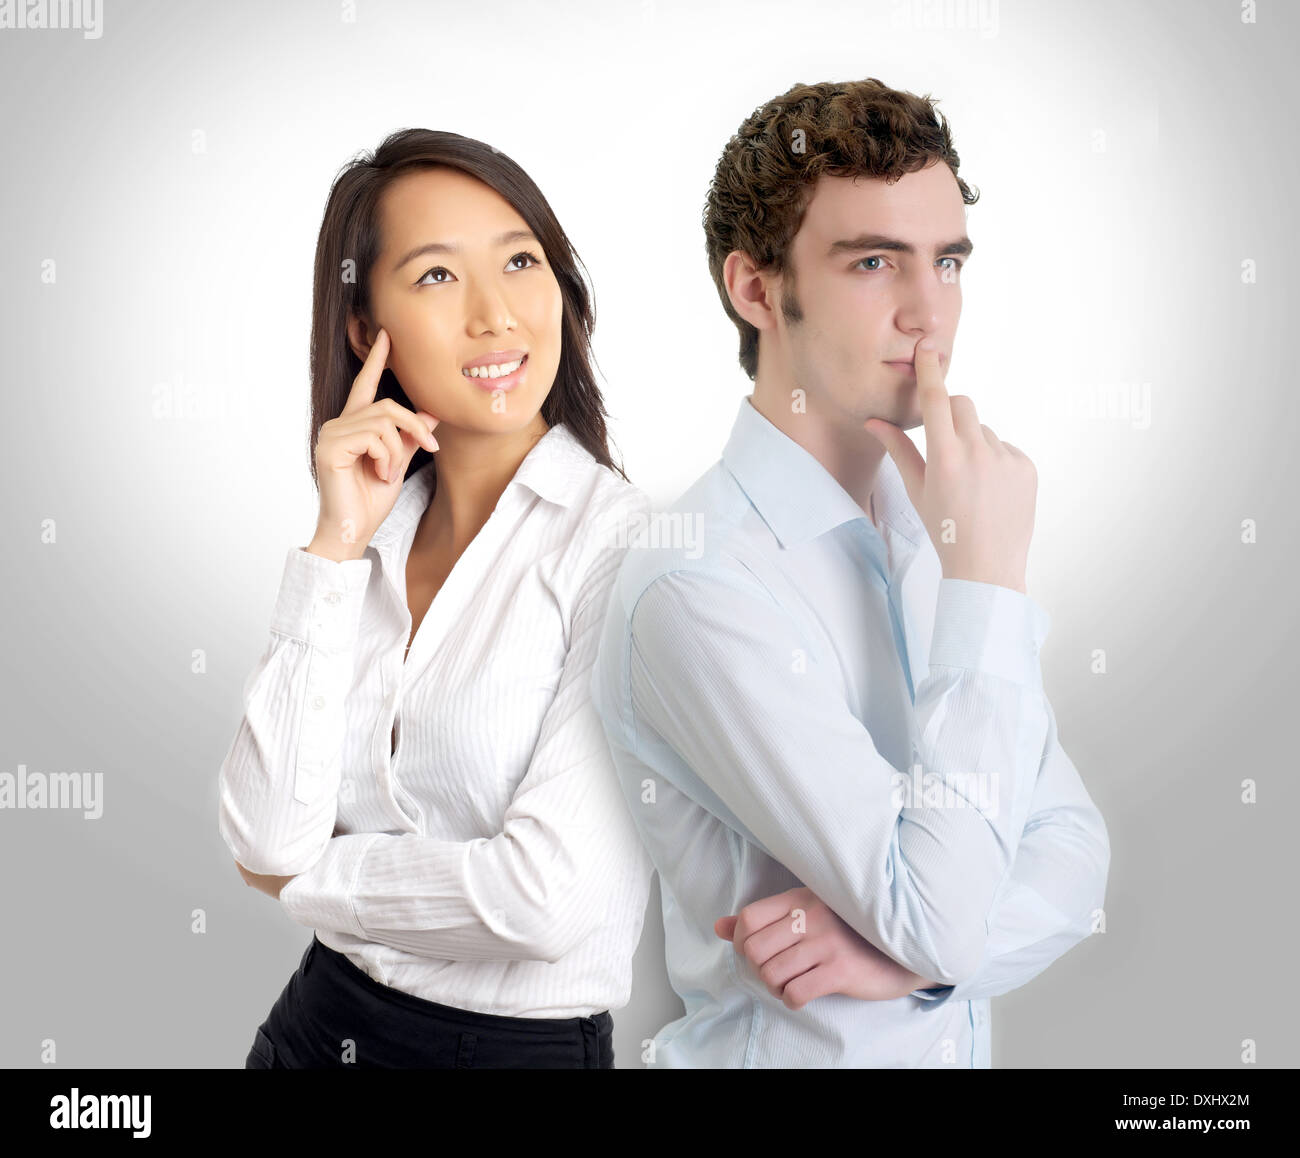 Two creative professionals in thinking pose Stock Photo